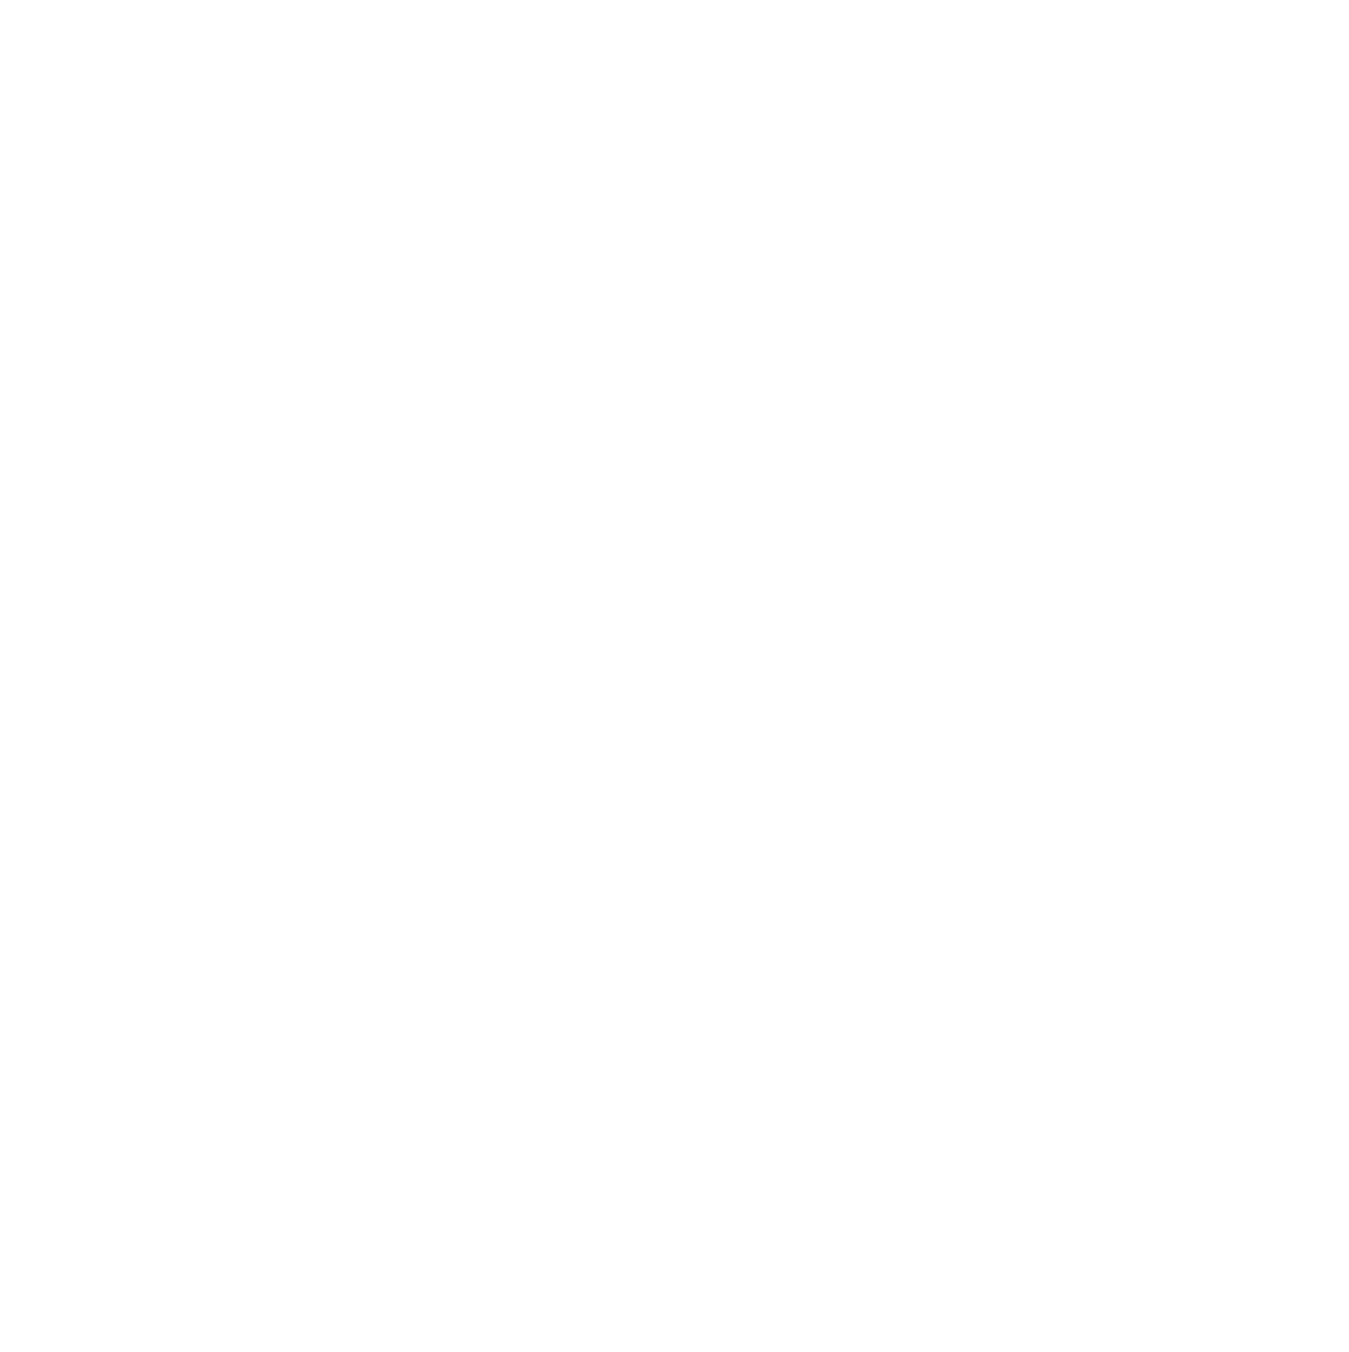 National Botanicals 3rd Party Lab Tested Certificate of Analysis